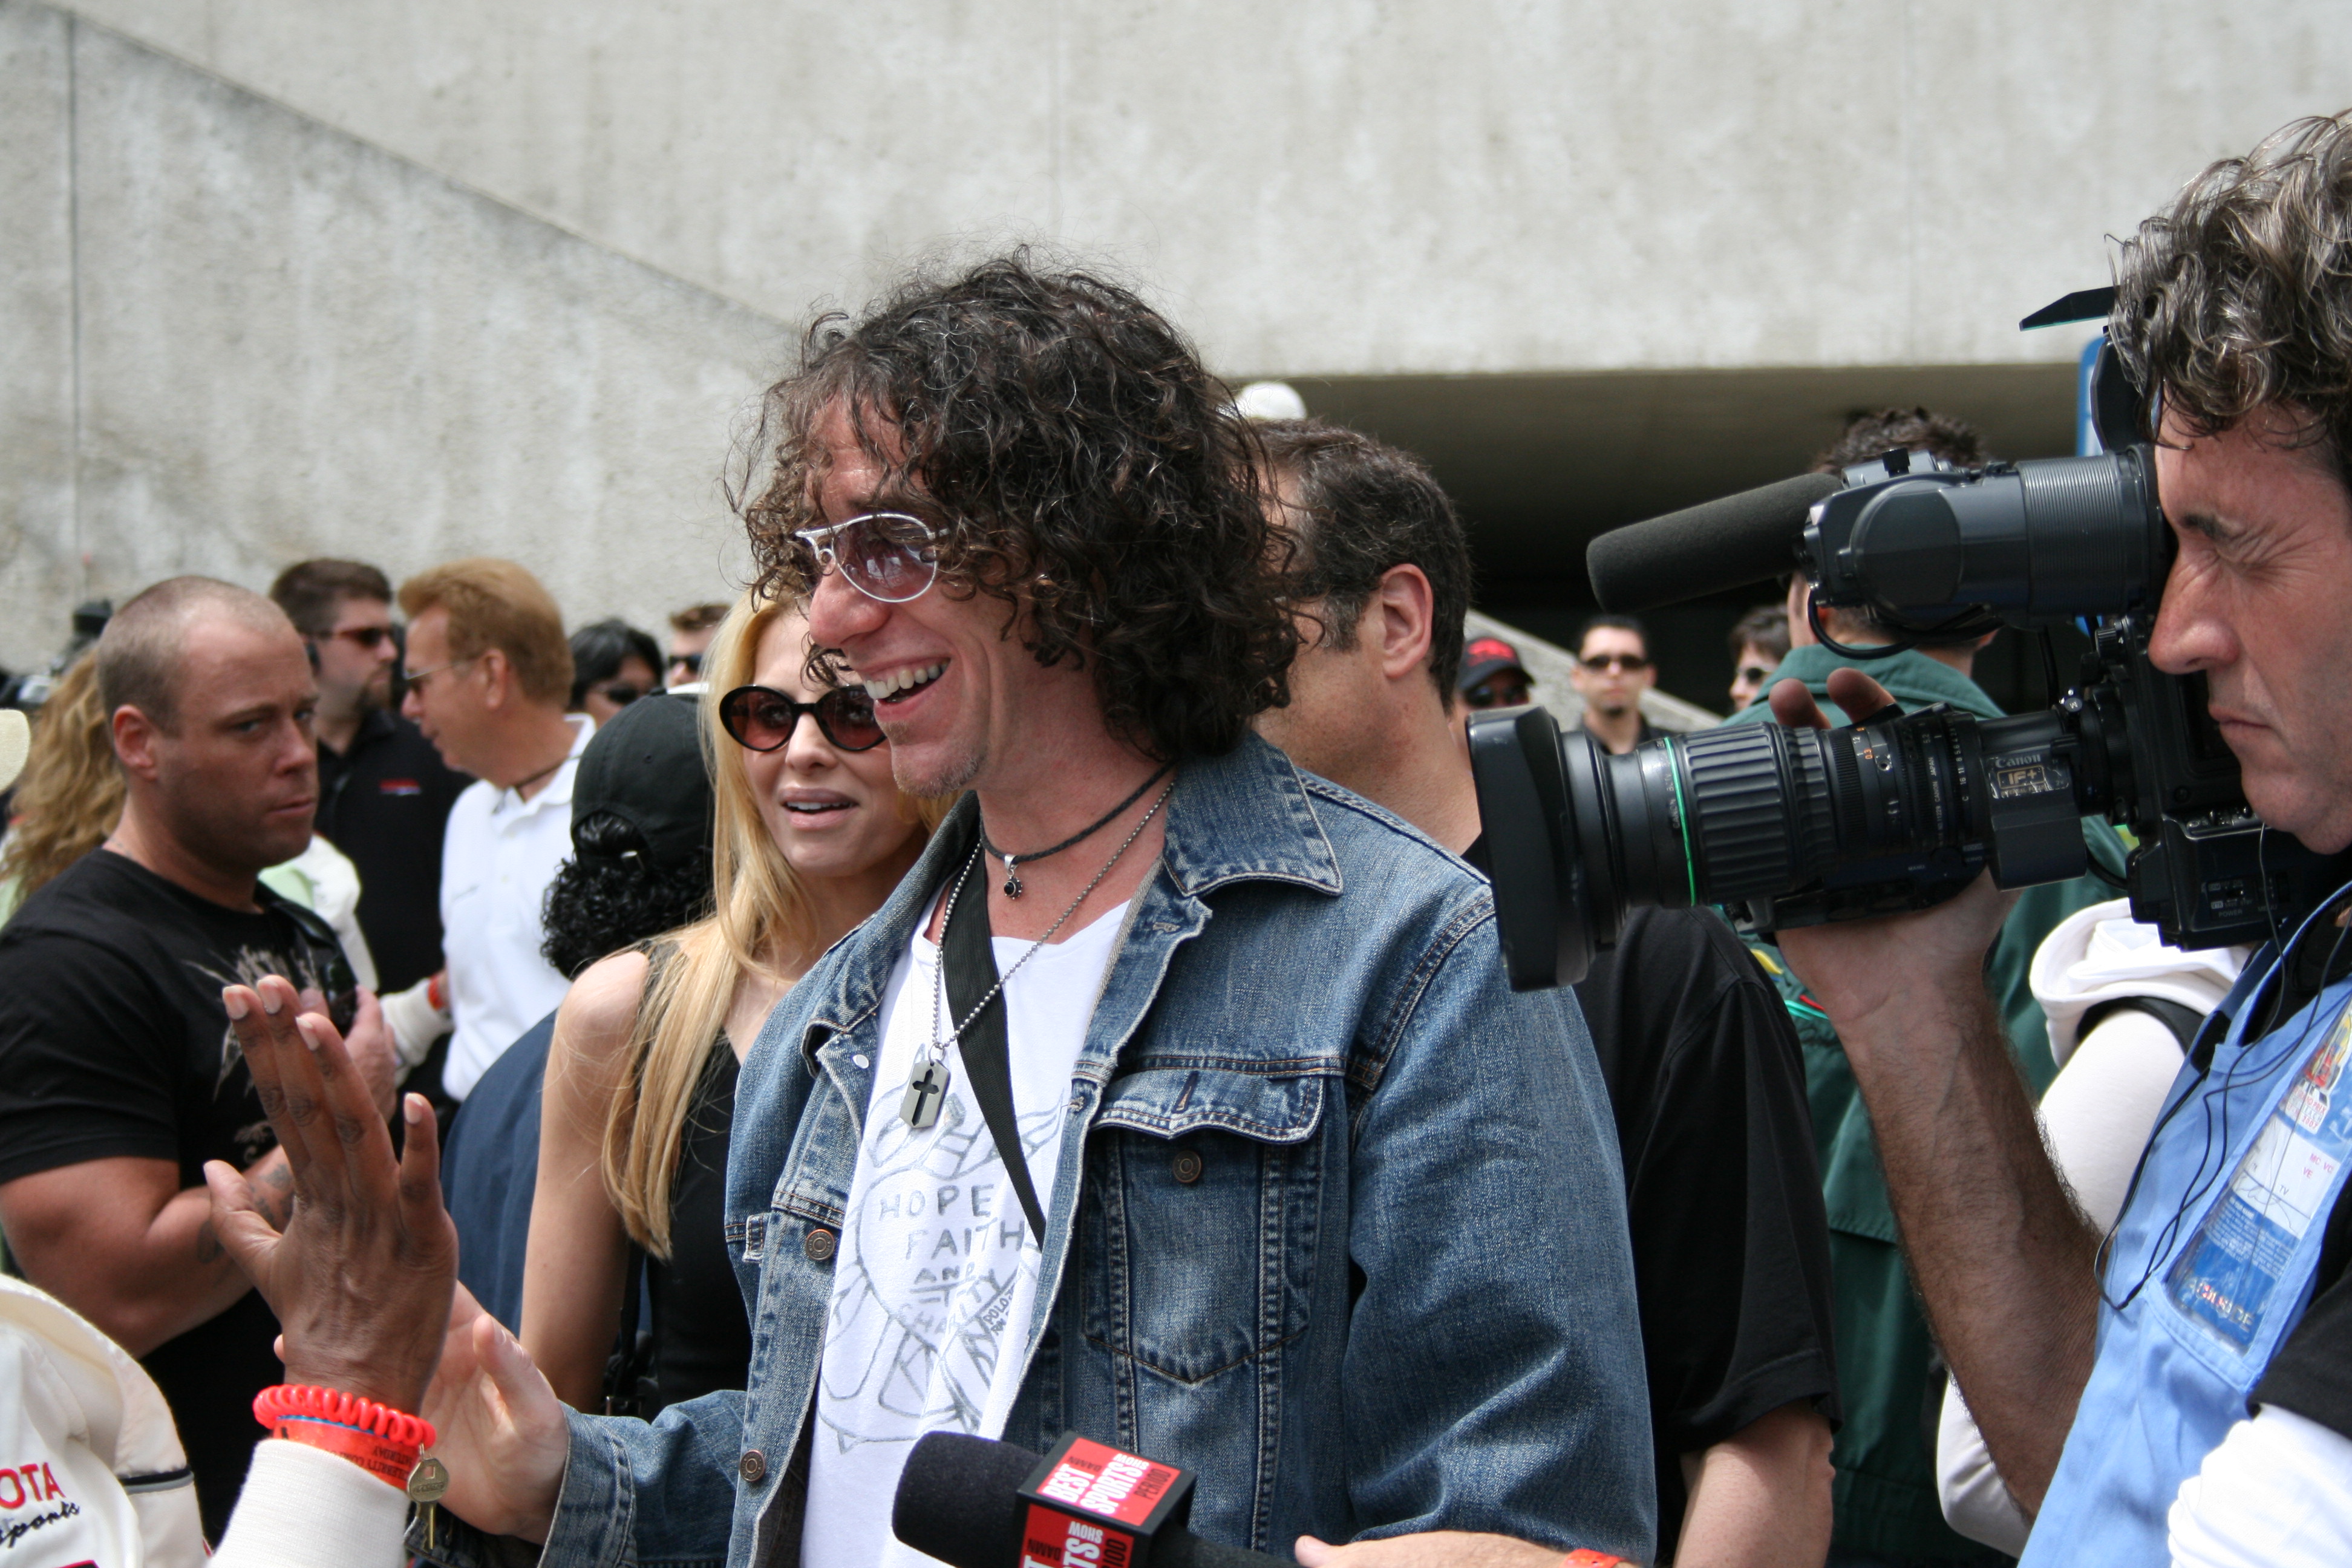 Sheila House field producing for I.E. News. Pictured is Howard Stern at the Toyota Grand Prix Celebrity Pro Race in Long Beach, CA.